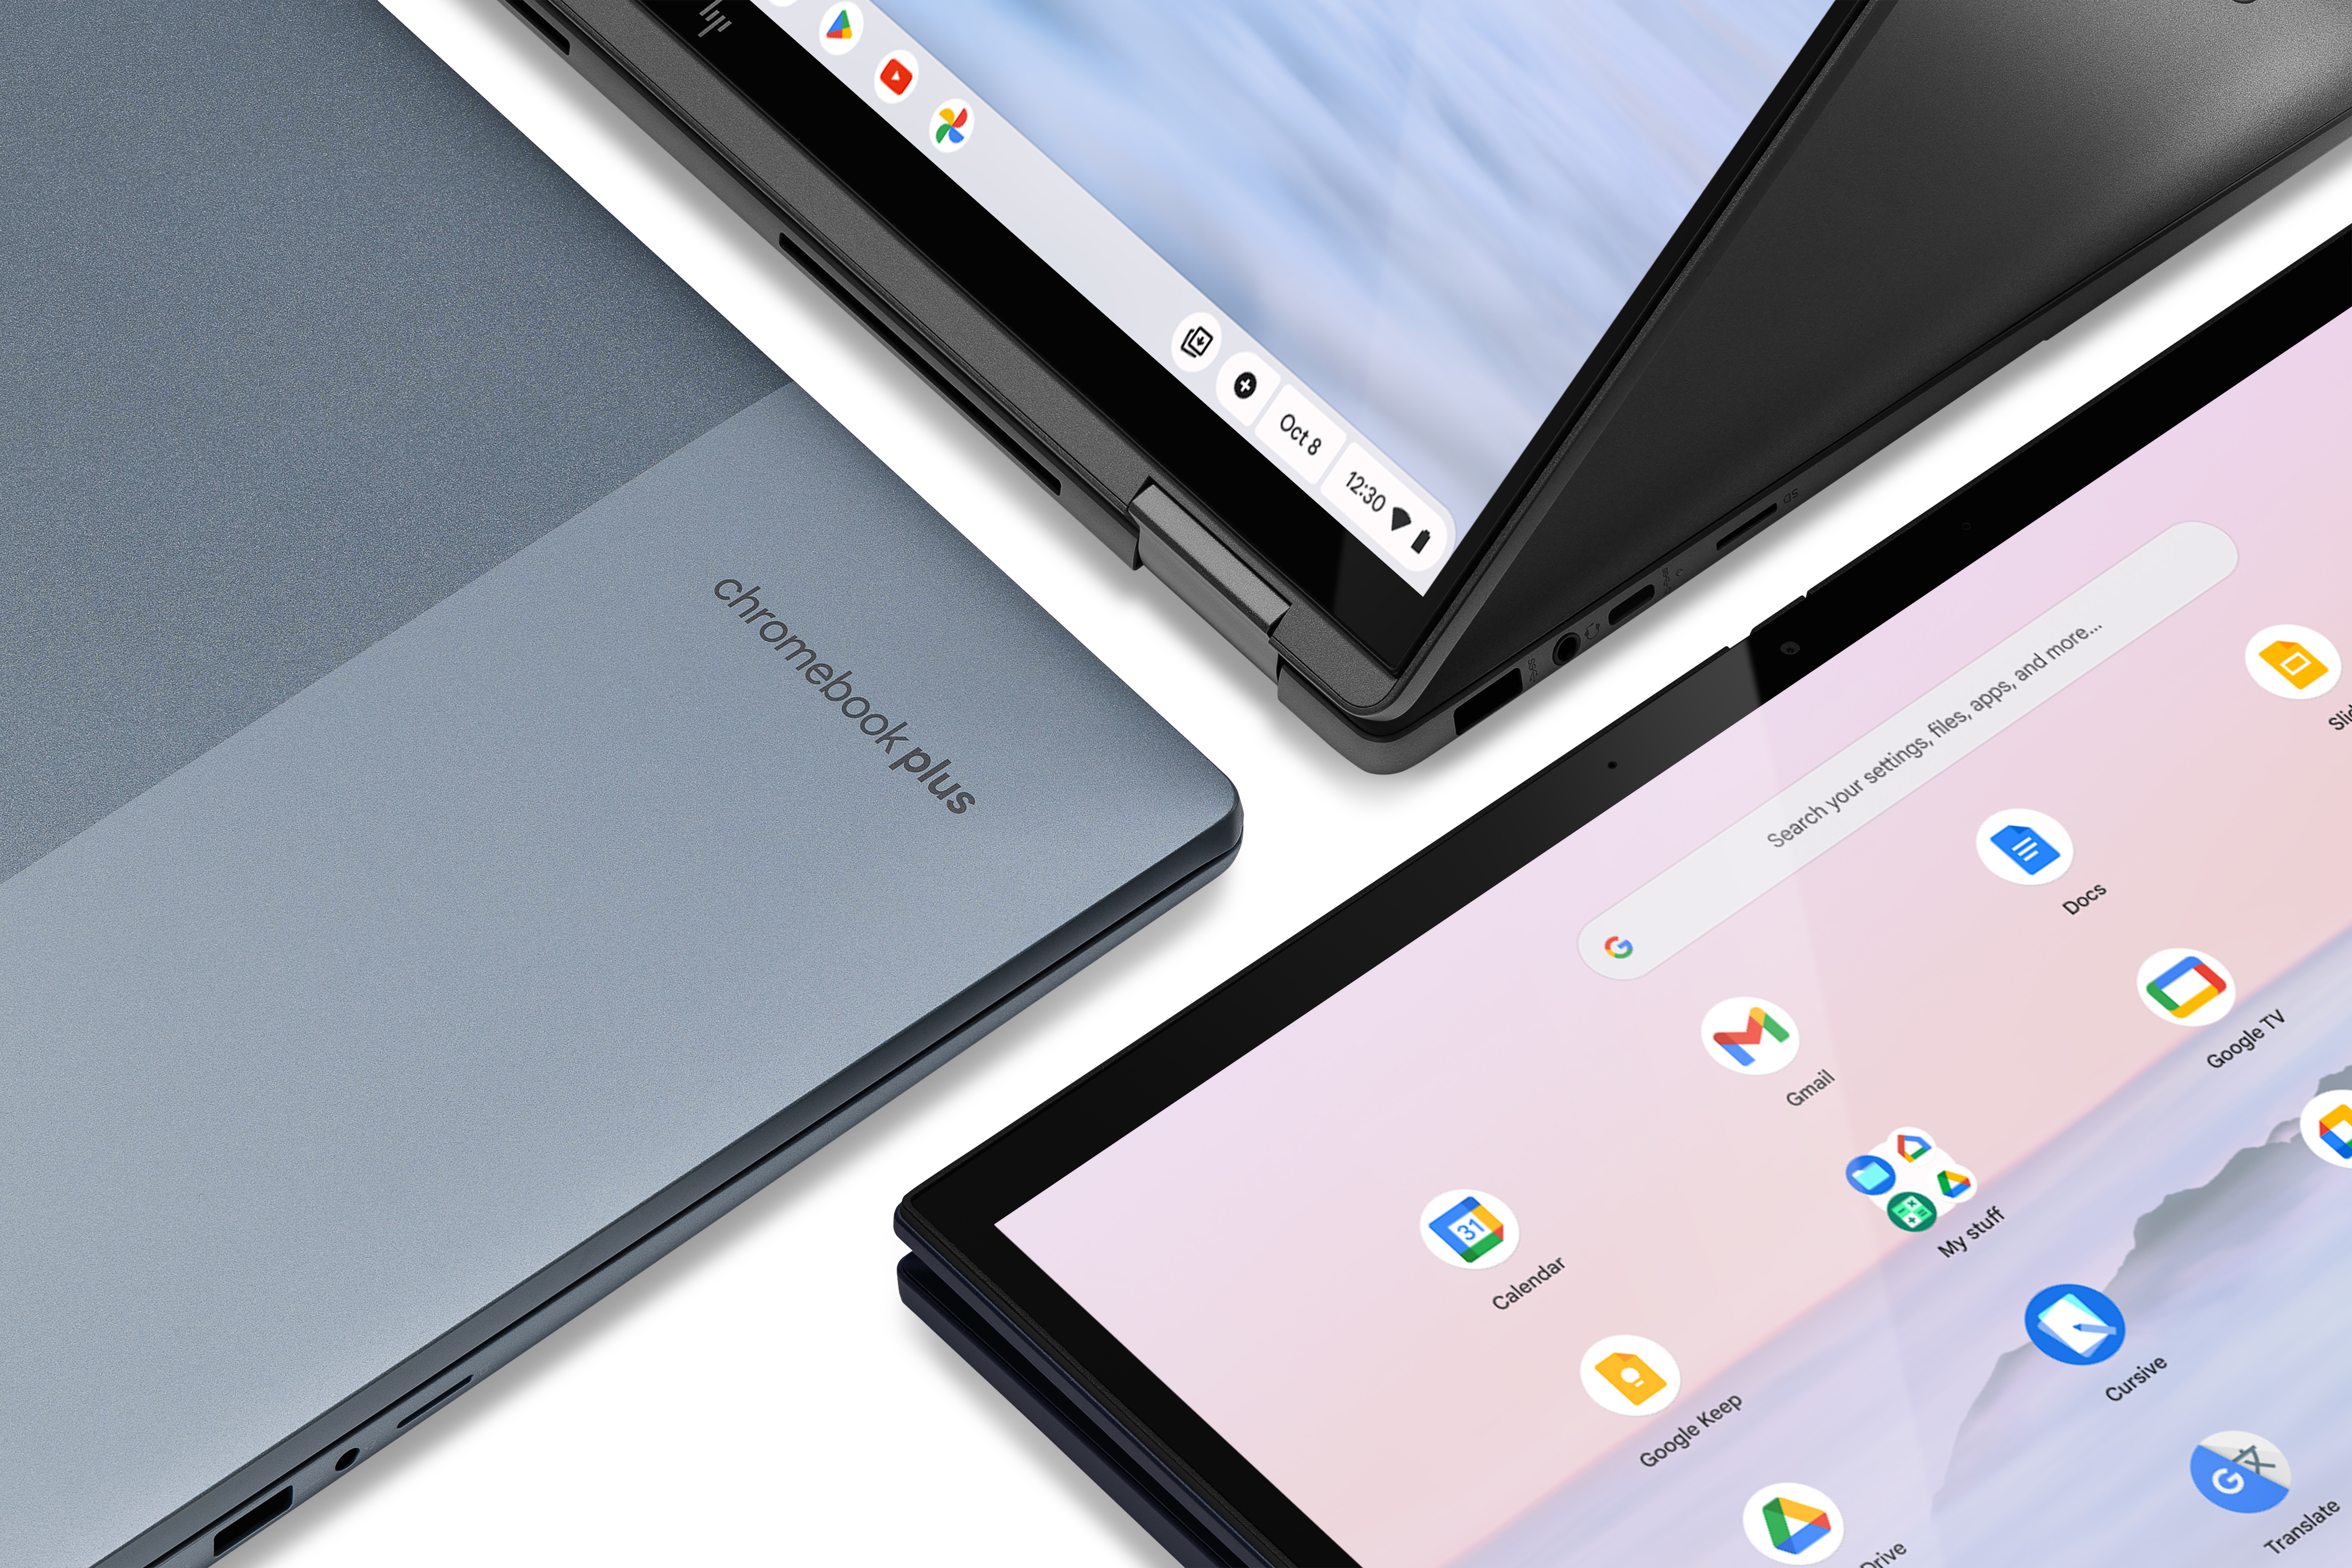 Google announces Chromebook Plus with boosted hardware specs and AI features